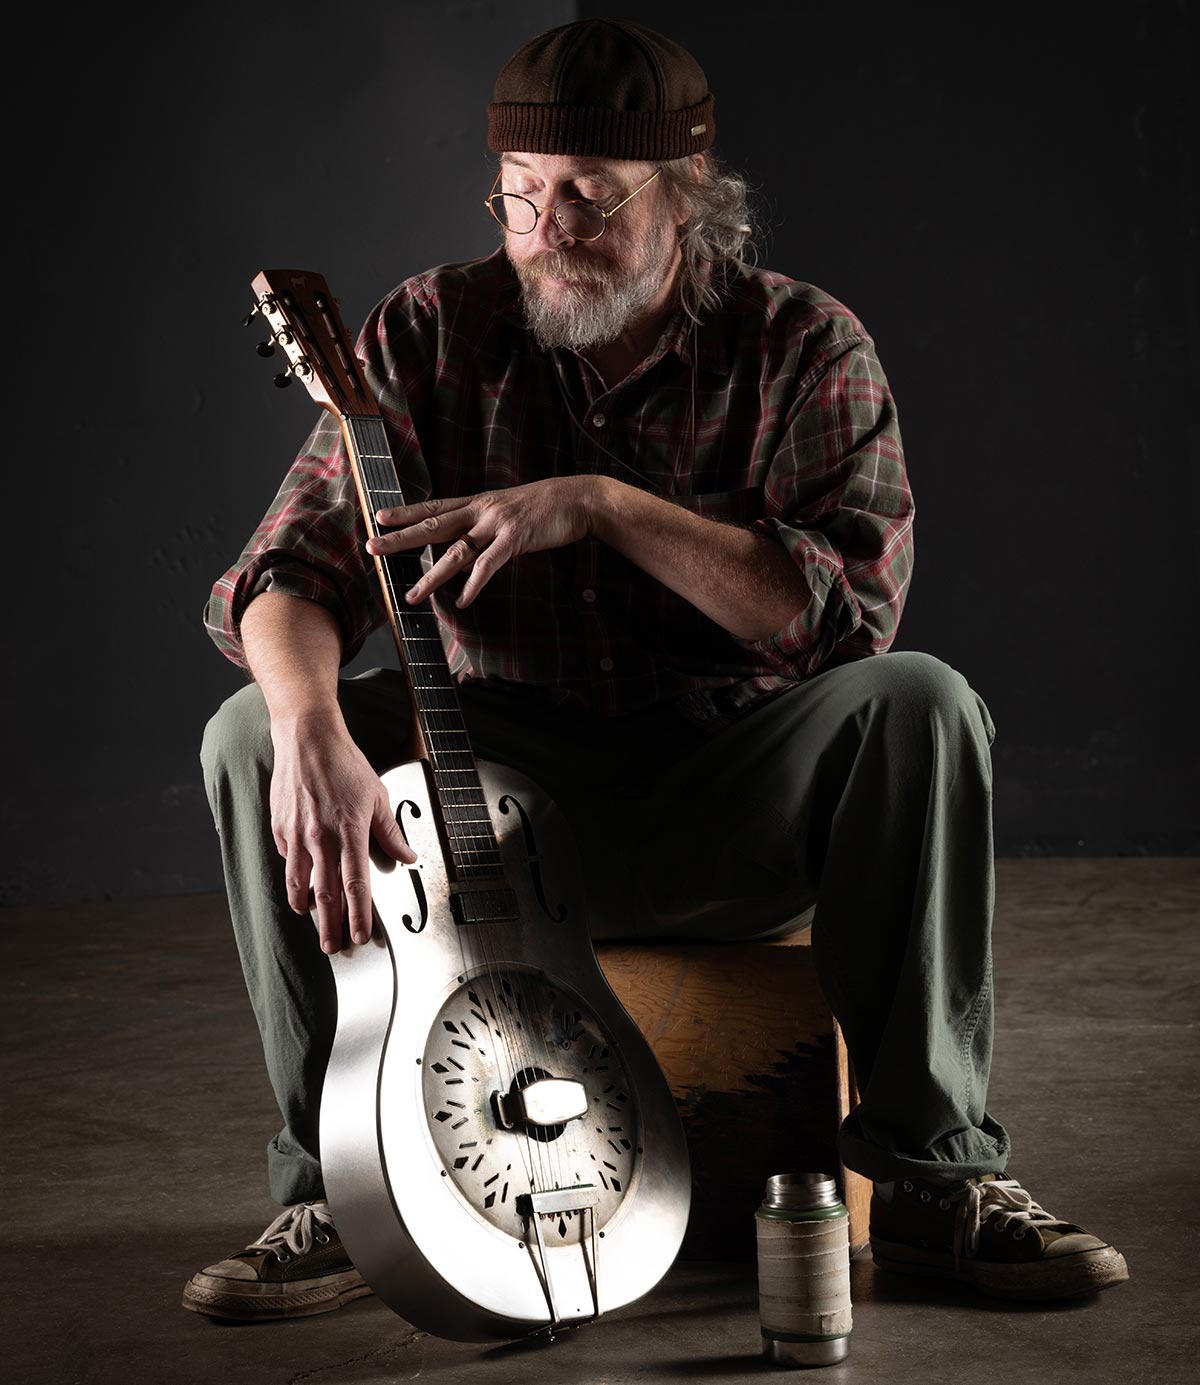 Singer, songwriter, and guitarist Charlie Parr